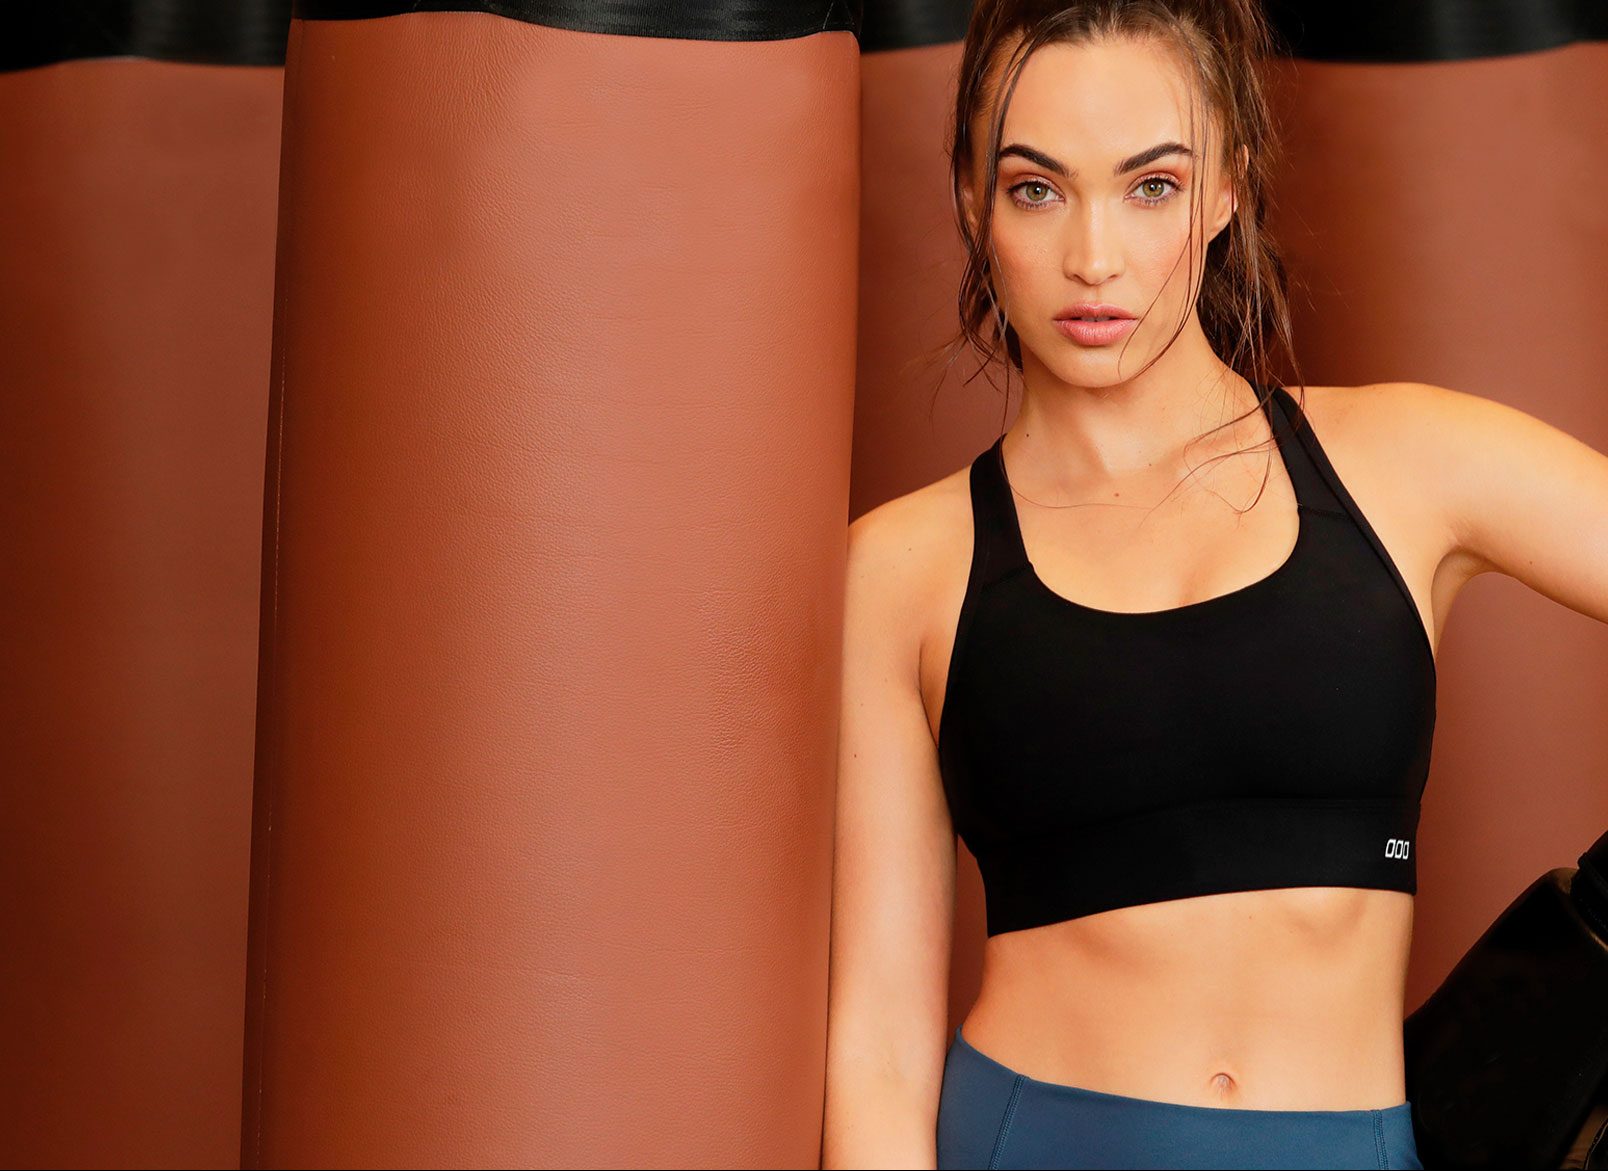 Australian Activewear Company Lorna Jane is Being Sued Over its